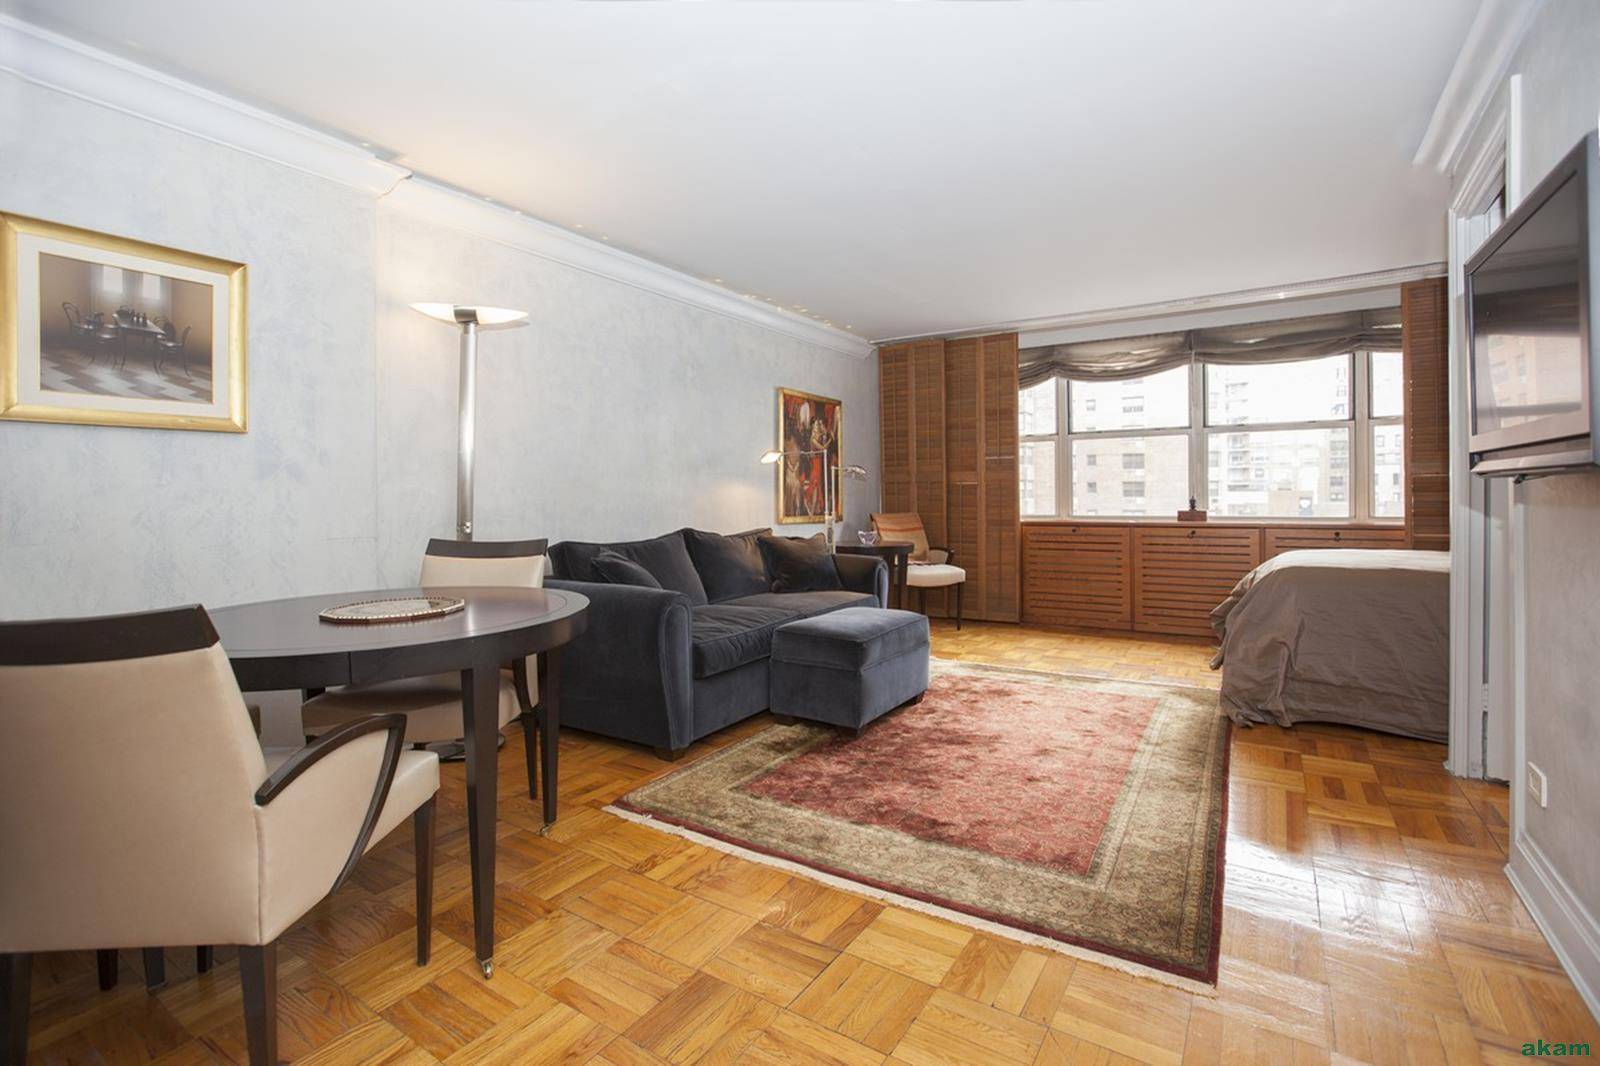 Tastefully renovated this spacious and light alcove studio offers an art deco kitchen with marble floor, granite counters with a stylish tin back splash and glass cabinets.